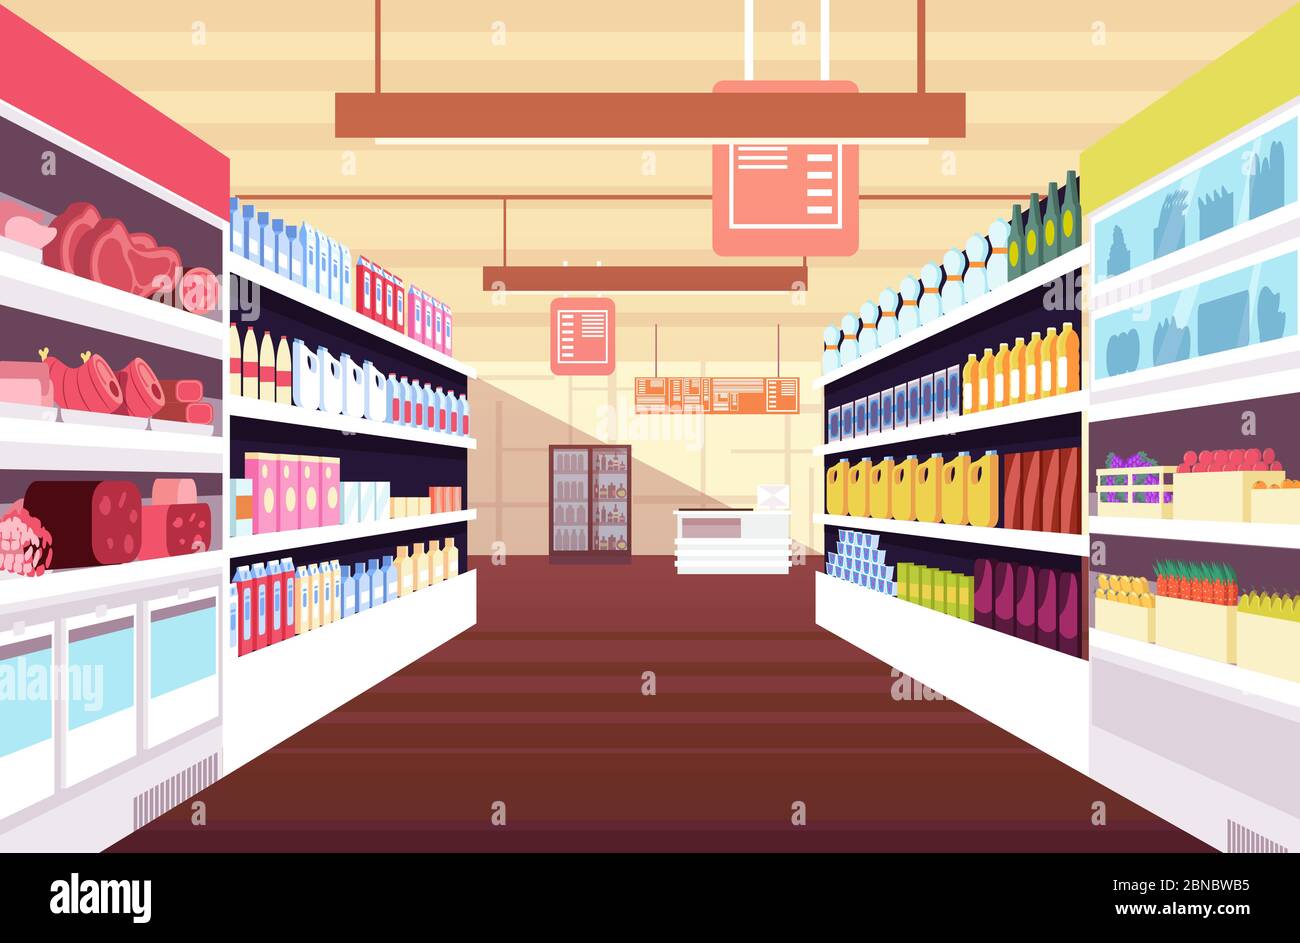 Grocery supermarket interior with full product shelves. Retail and consumerism vector concept. Illustration of supermarket and shop, grocery interior Stock Vector